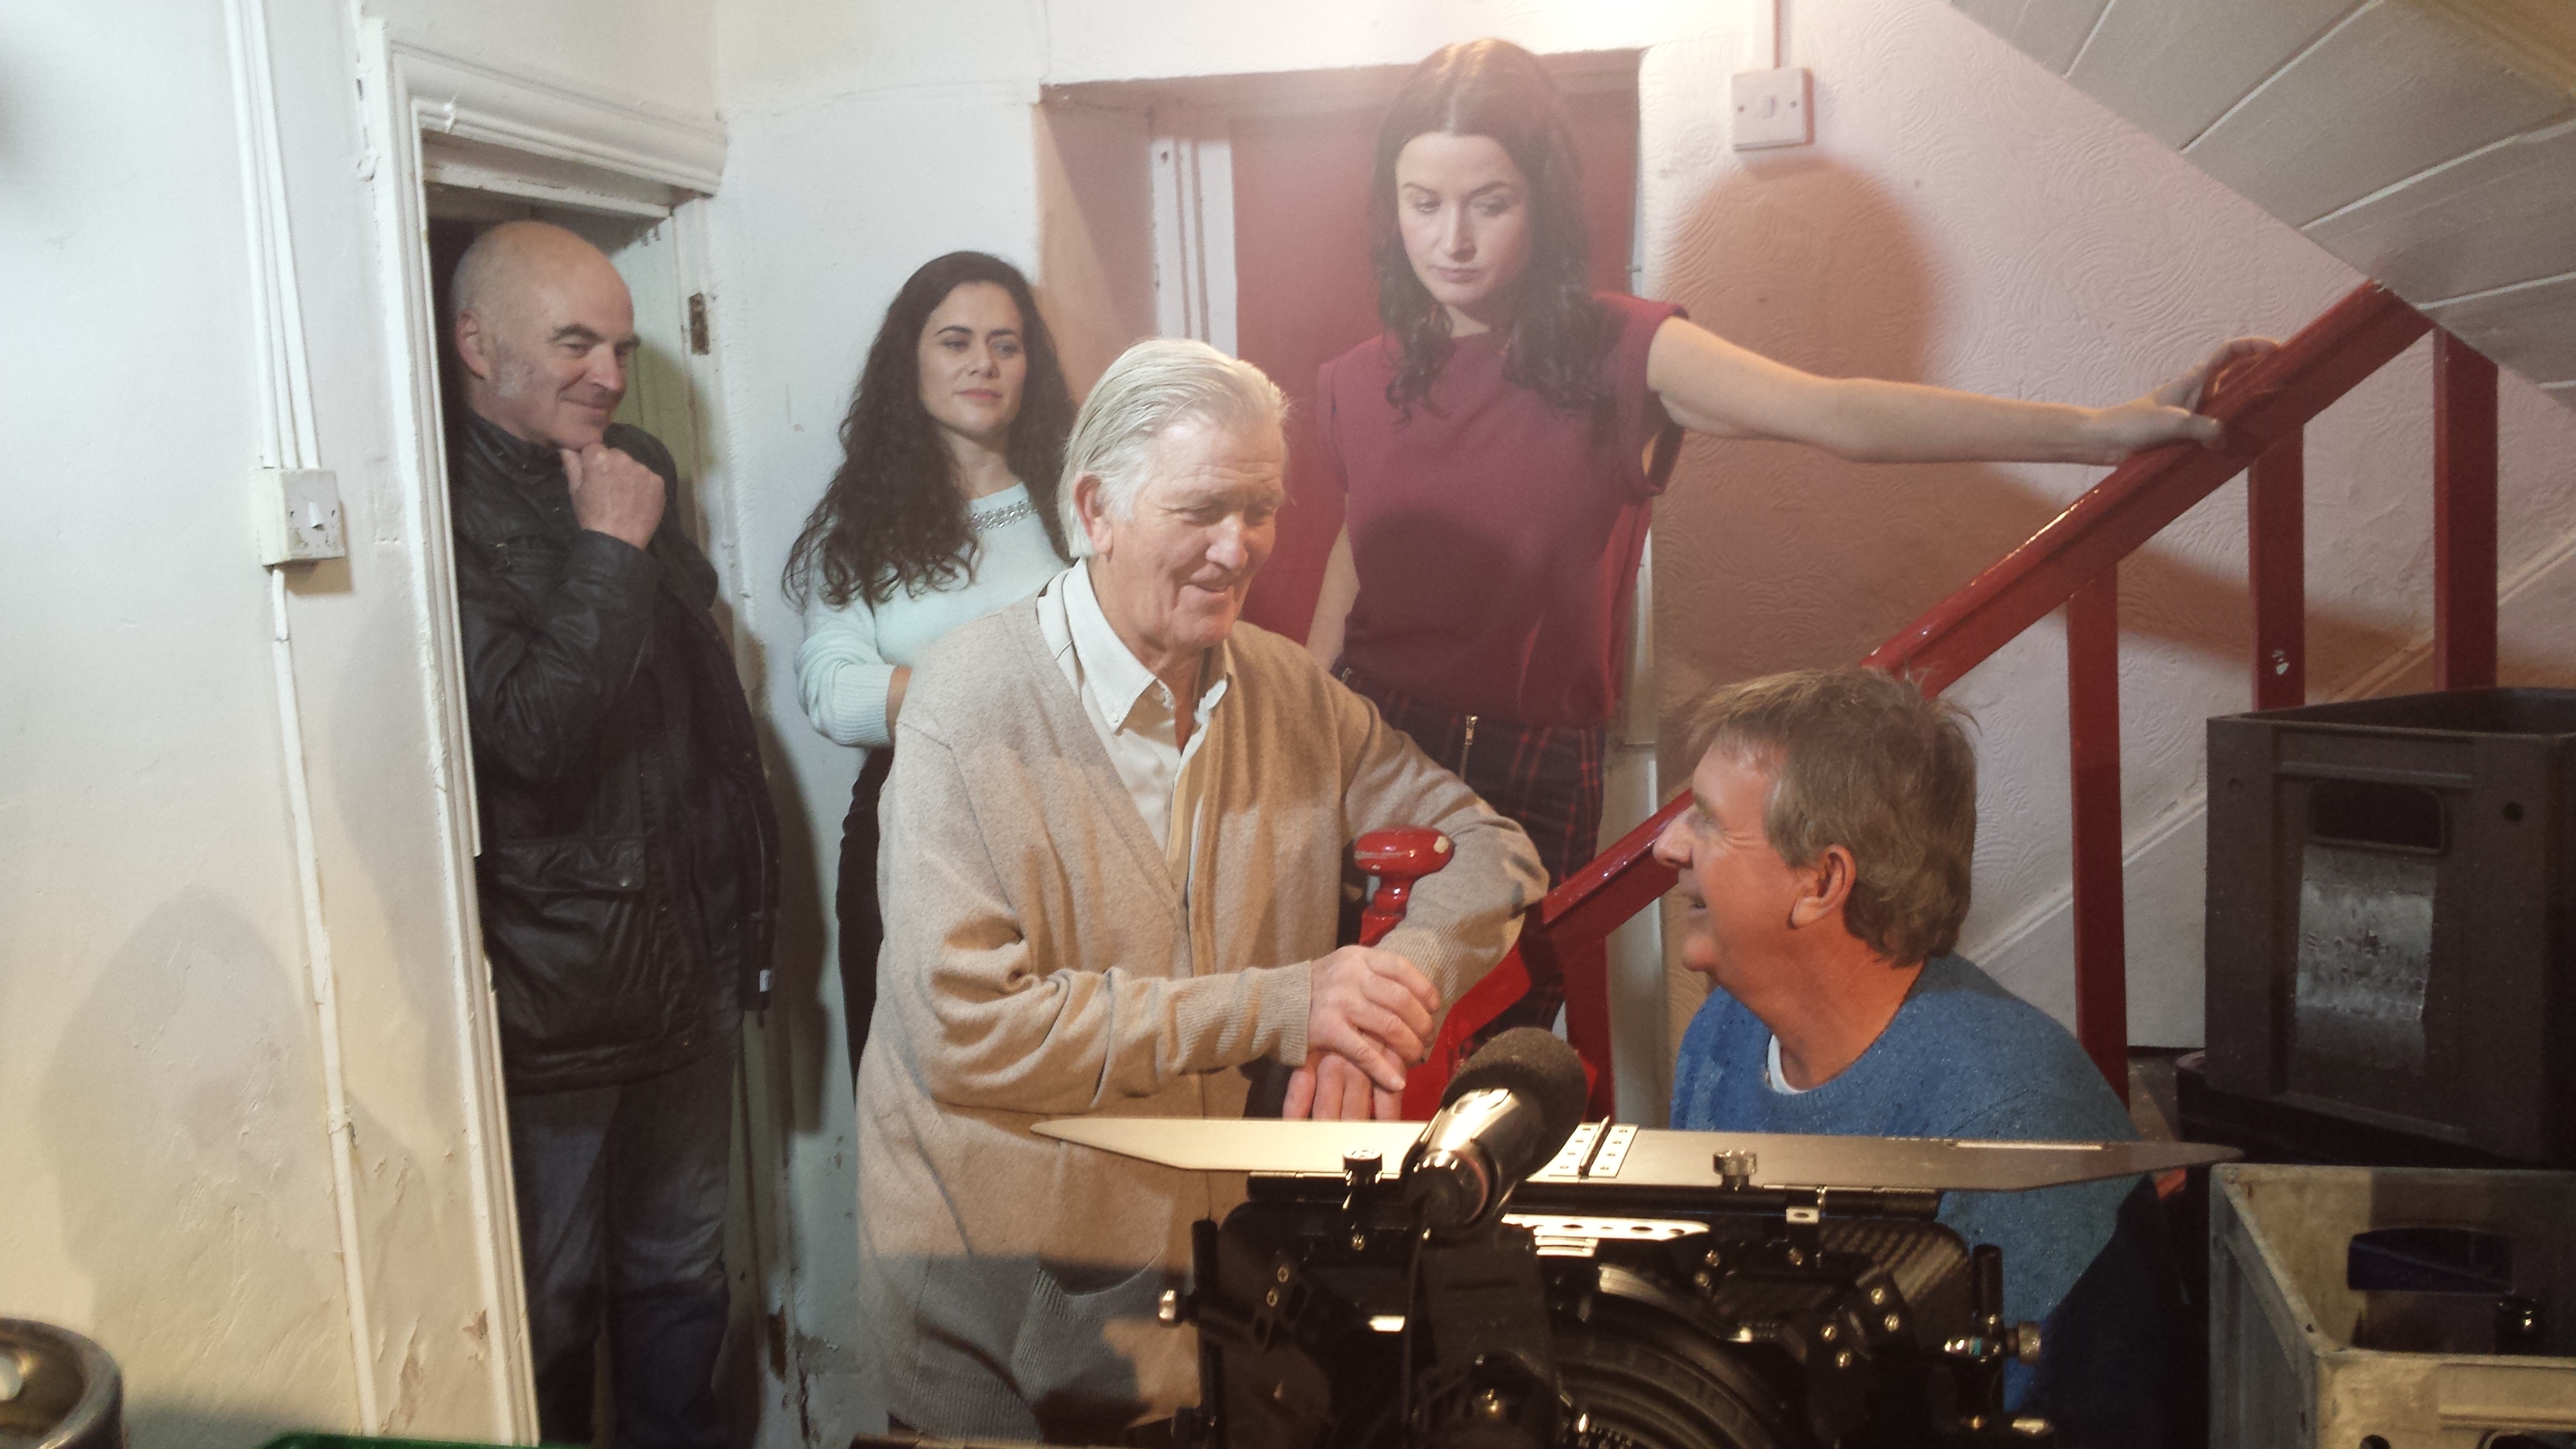 Norah King on location filming the Gaelic Curse (2016) with Nick McMarthy (L), Lynette Callaghan (R), Jack Conroy (director / DOP) and Brian Walsh (Writer / Producer).